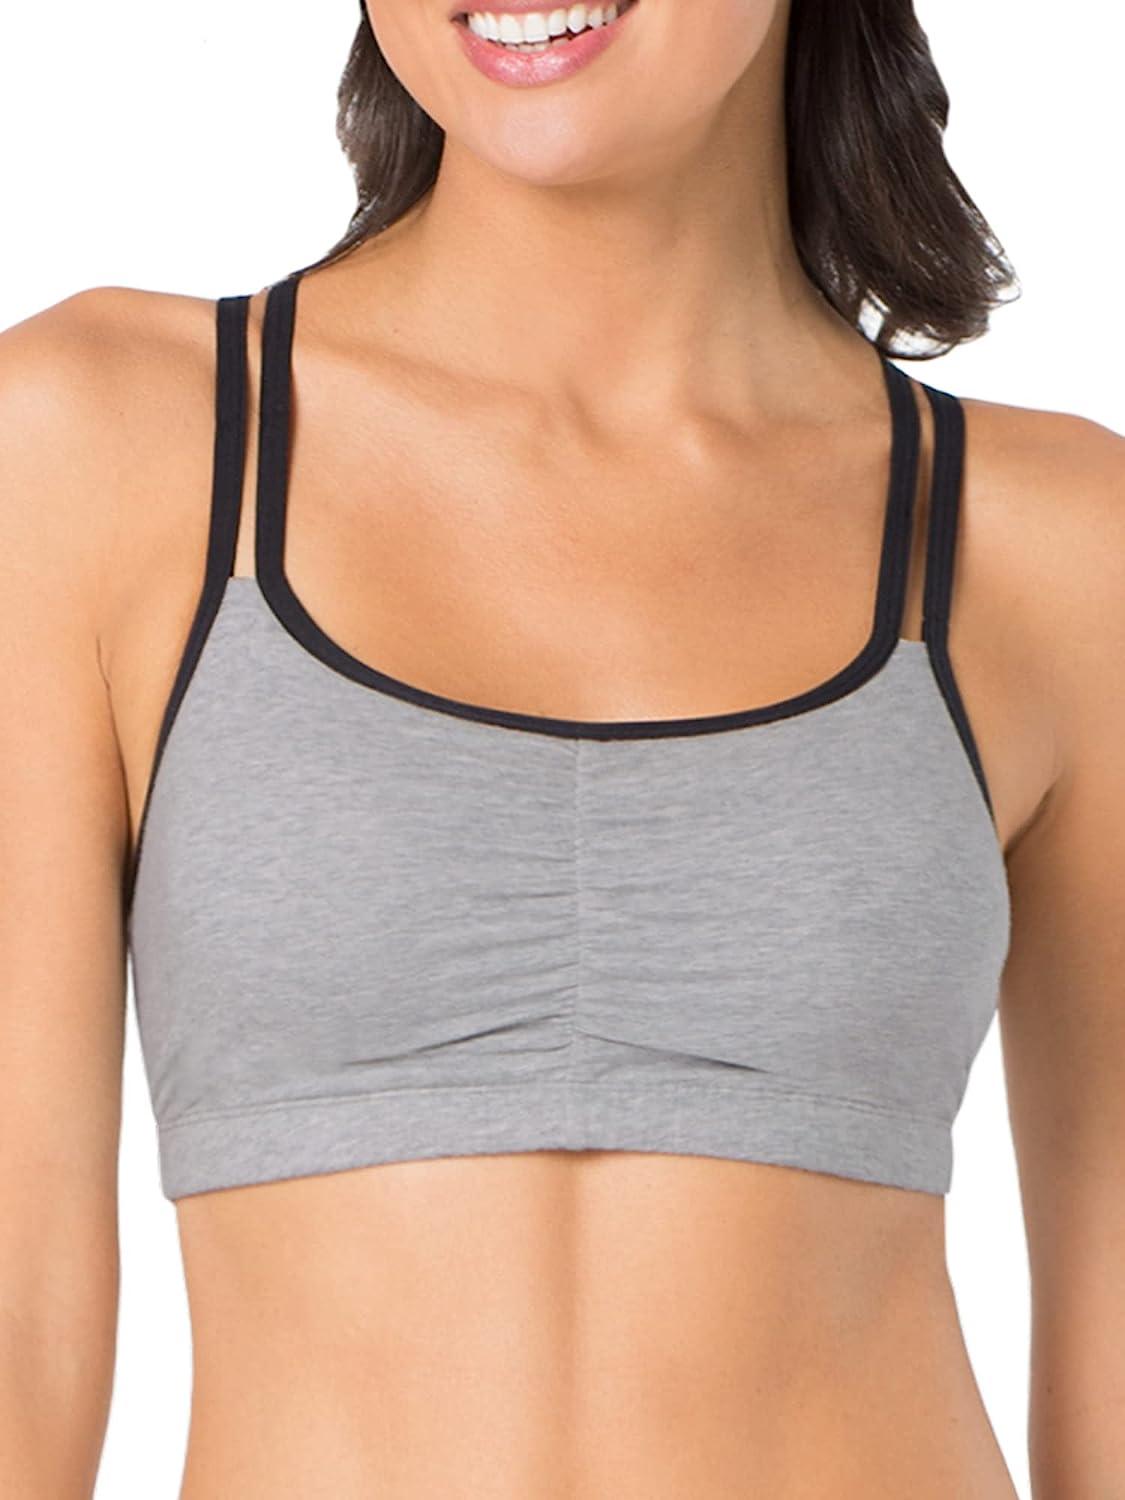 Fruit of the Loom Womens Adjustable Shirred Front Racerback